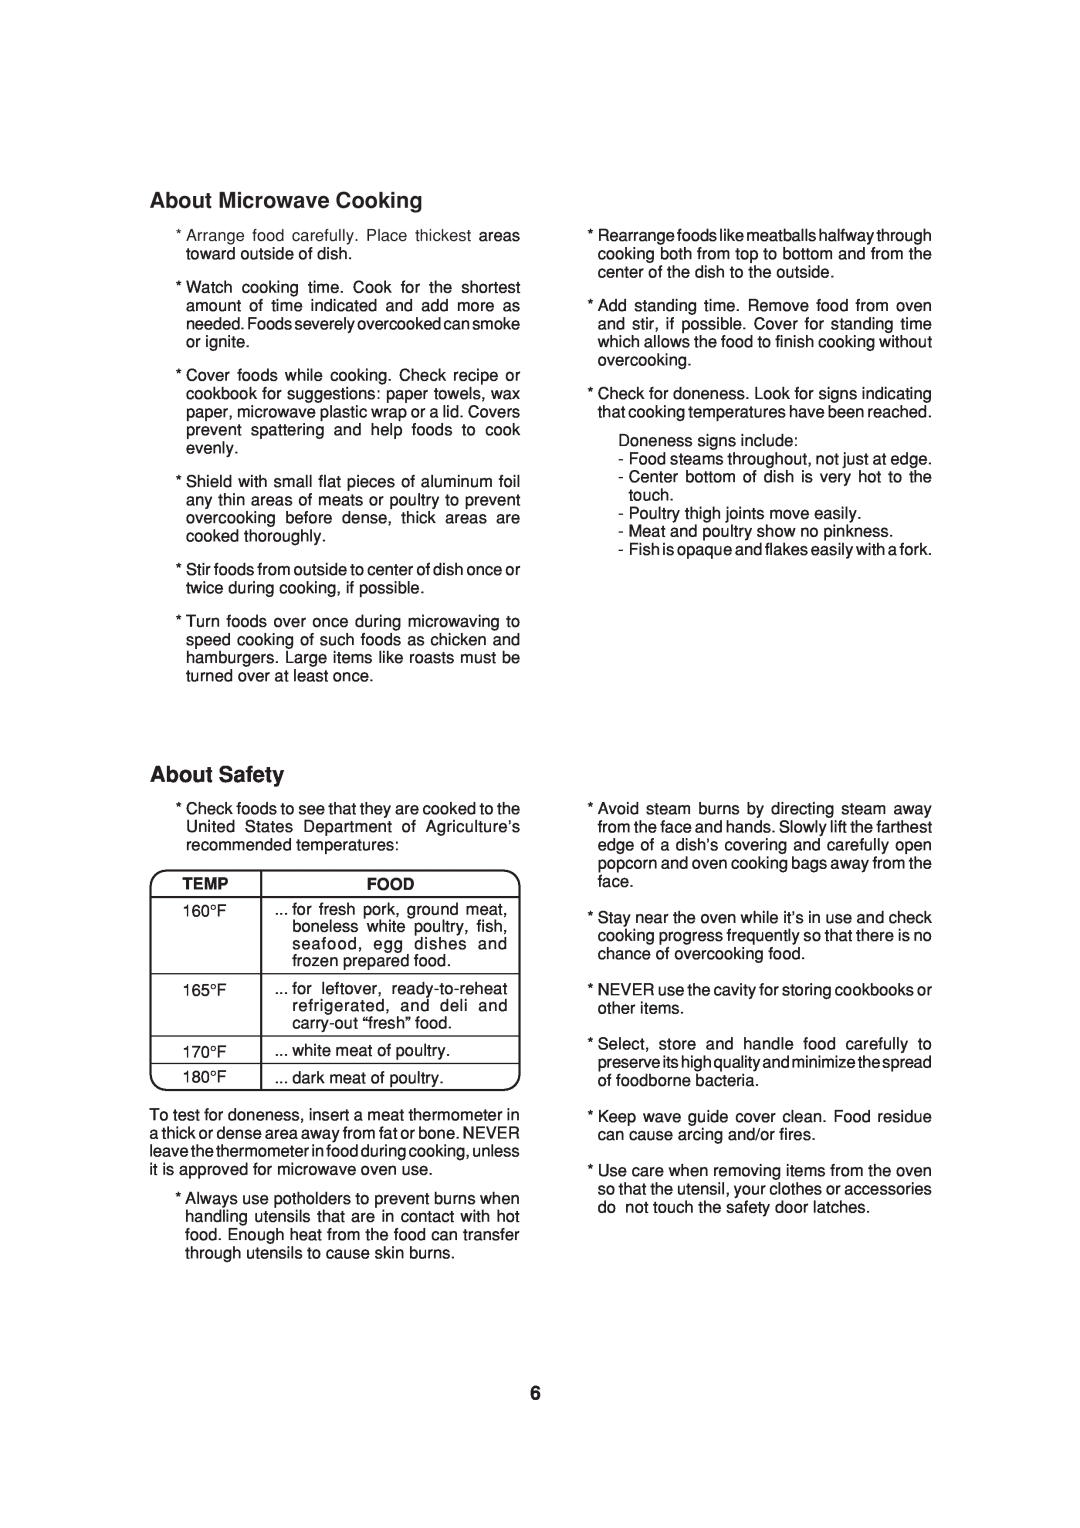 Sharp R-308A, R-312A, R-305A, R-309B, R-310A, R-305B operation manual About Microwave Cooking, About Safety, Temp, Food 